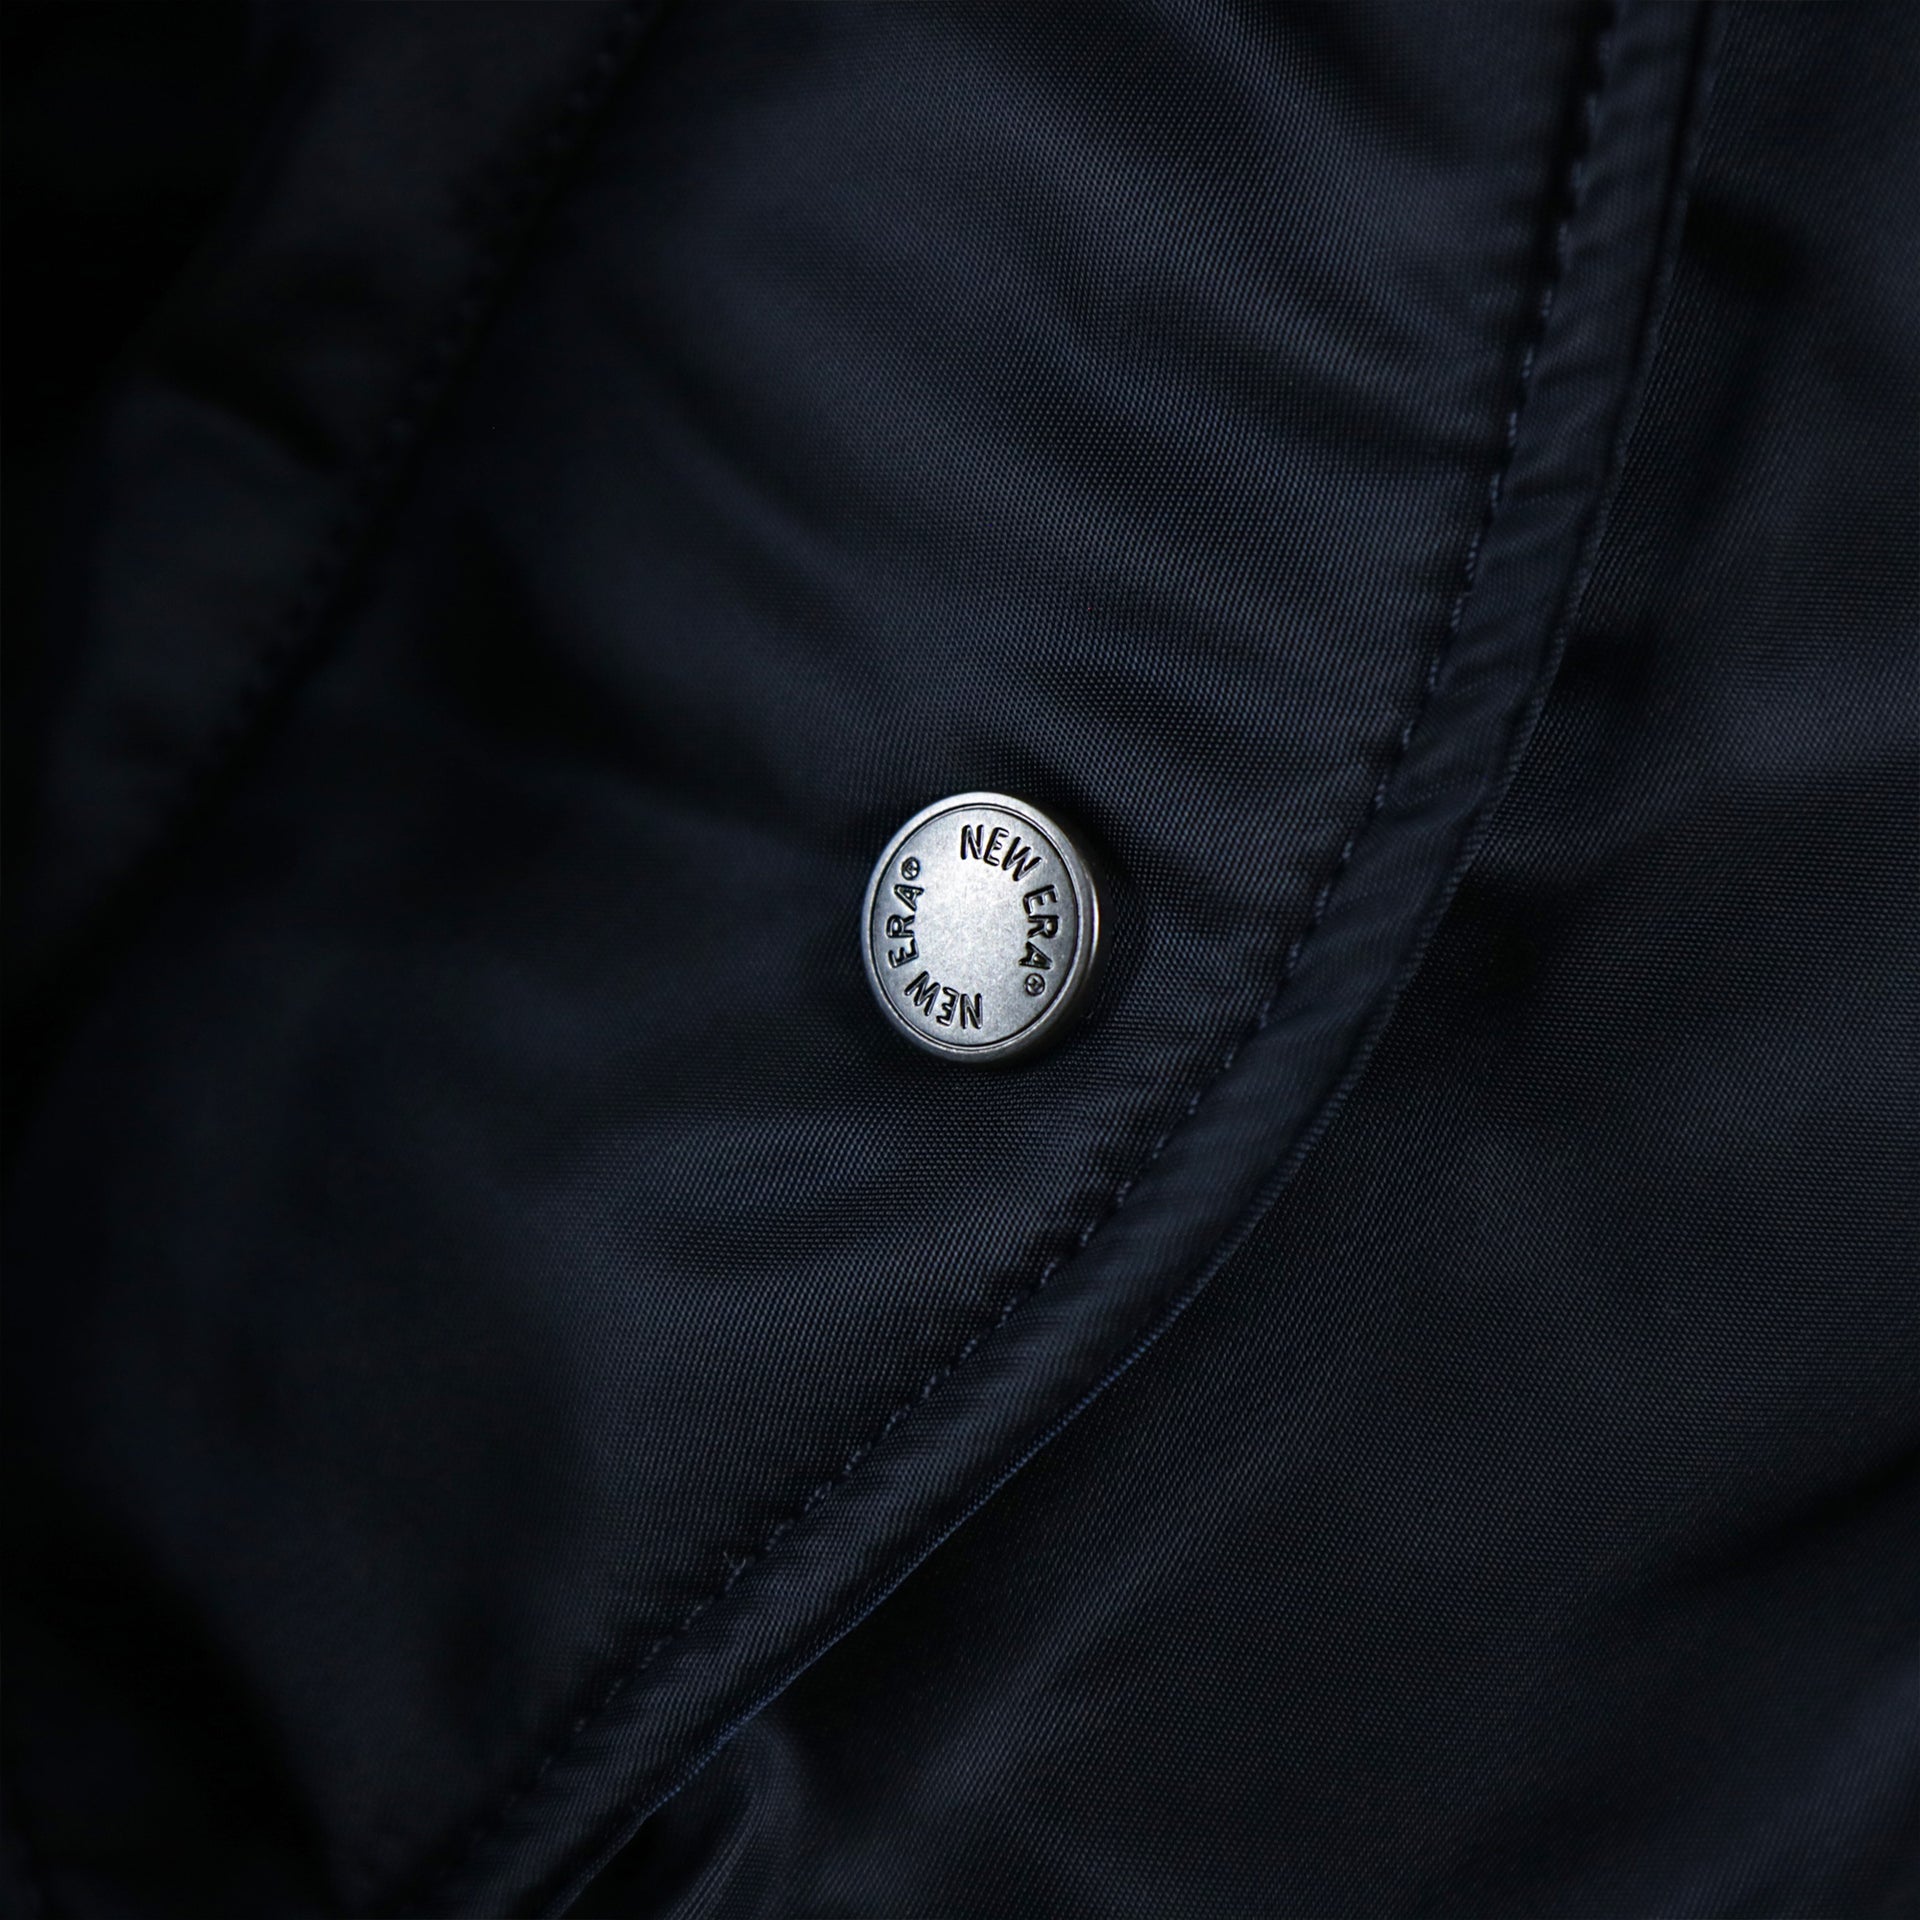 The Custom Metal Buttons With New Era Wordmark on the Atlanta Braves MLB Patch Alpha Industries Reversible Bomber Jacket With Camo Liner | Navy Blue Bomber Jacket